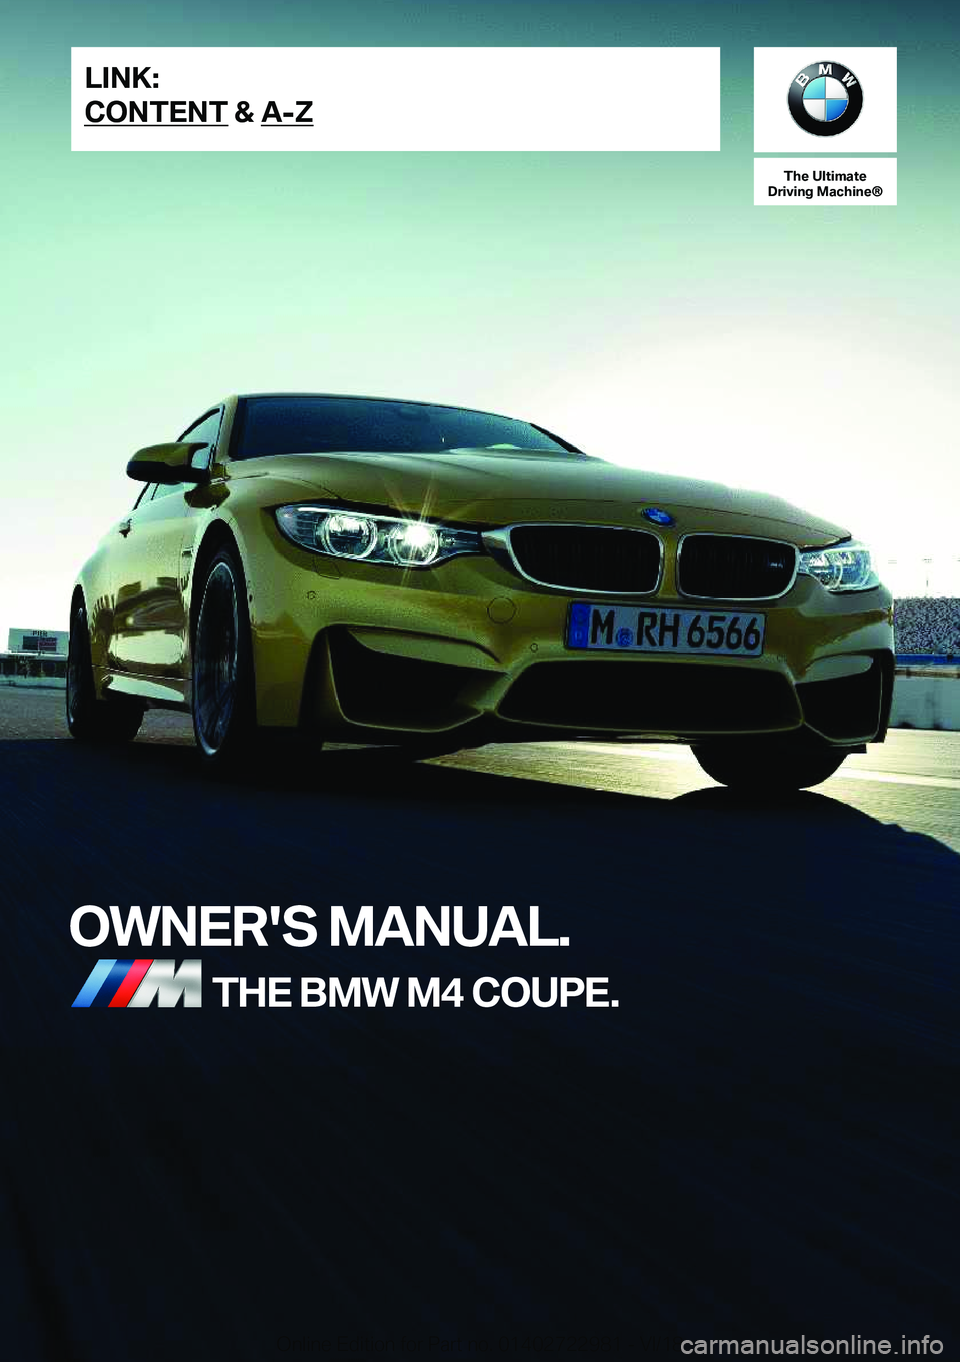 BMW M4 2019  Owners Manual �T�h�e��U�l�t�i�m�a�t�e
�D�r�i�v�i�n�g��M�a�c�h�i�n�e�n
�O�W�N�E�R�'�S��M�A�N�U�A�L�.�T�H�E��B�M�W��M�4��C�O�U�P�E�.�L�I�N�K�:
�C�O�N�T�E�N�T��&��A�-�Z�O�n�l�i�n�e��E�d�i�t�i�o�n��f�o�r�